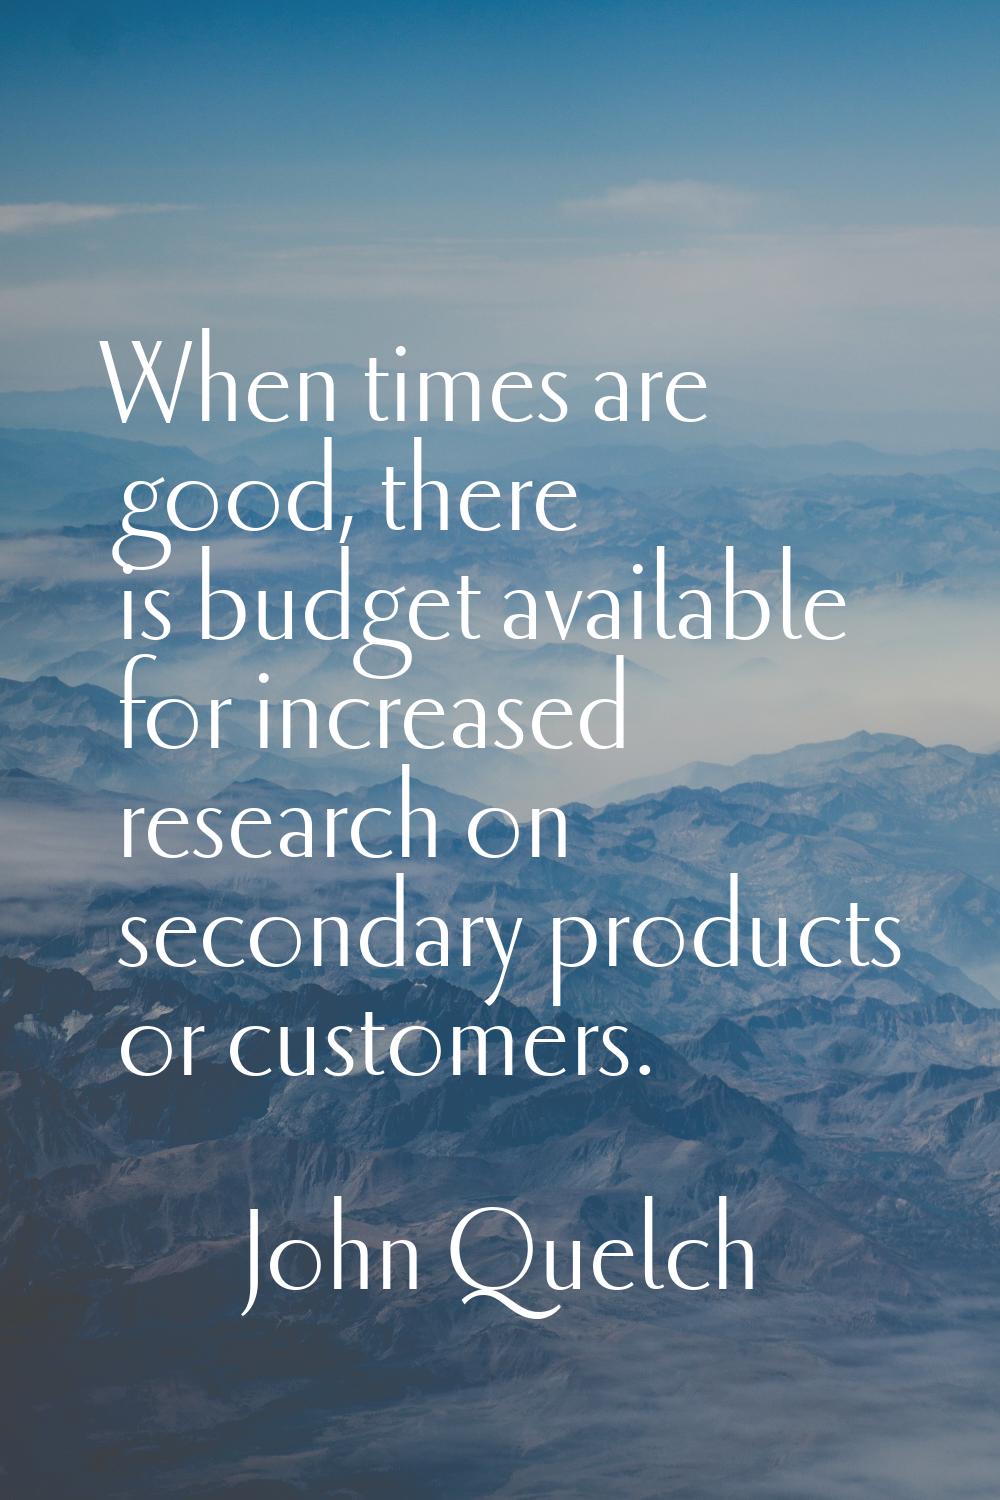 When times are good, there is budget available for increased research on secondary products or cust